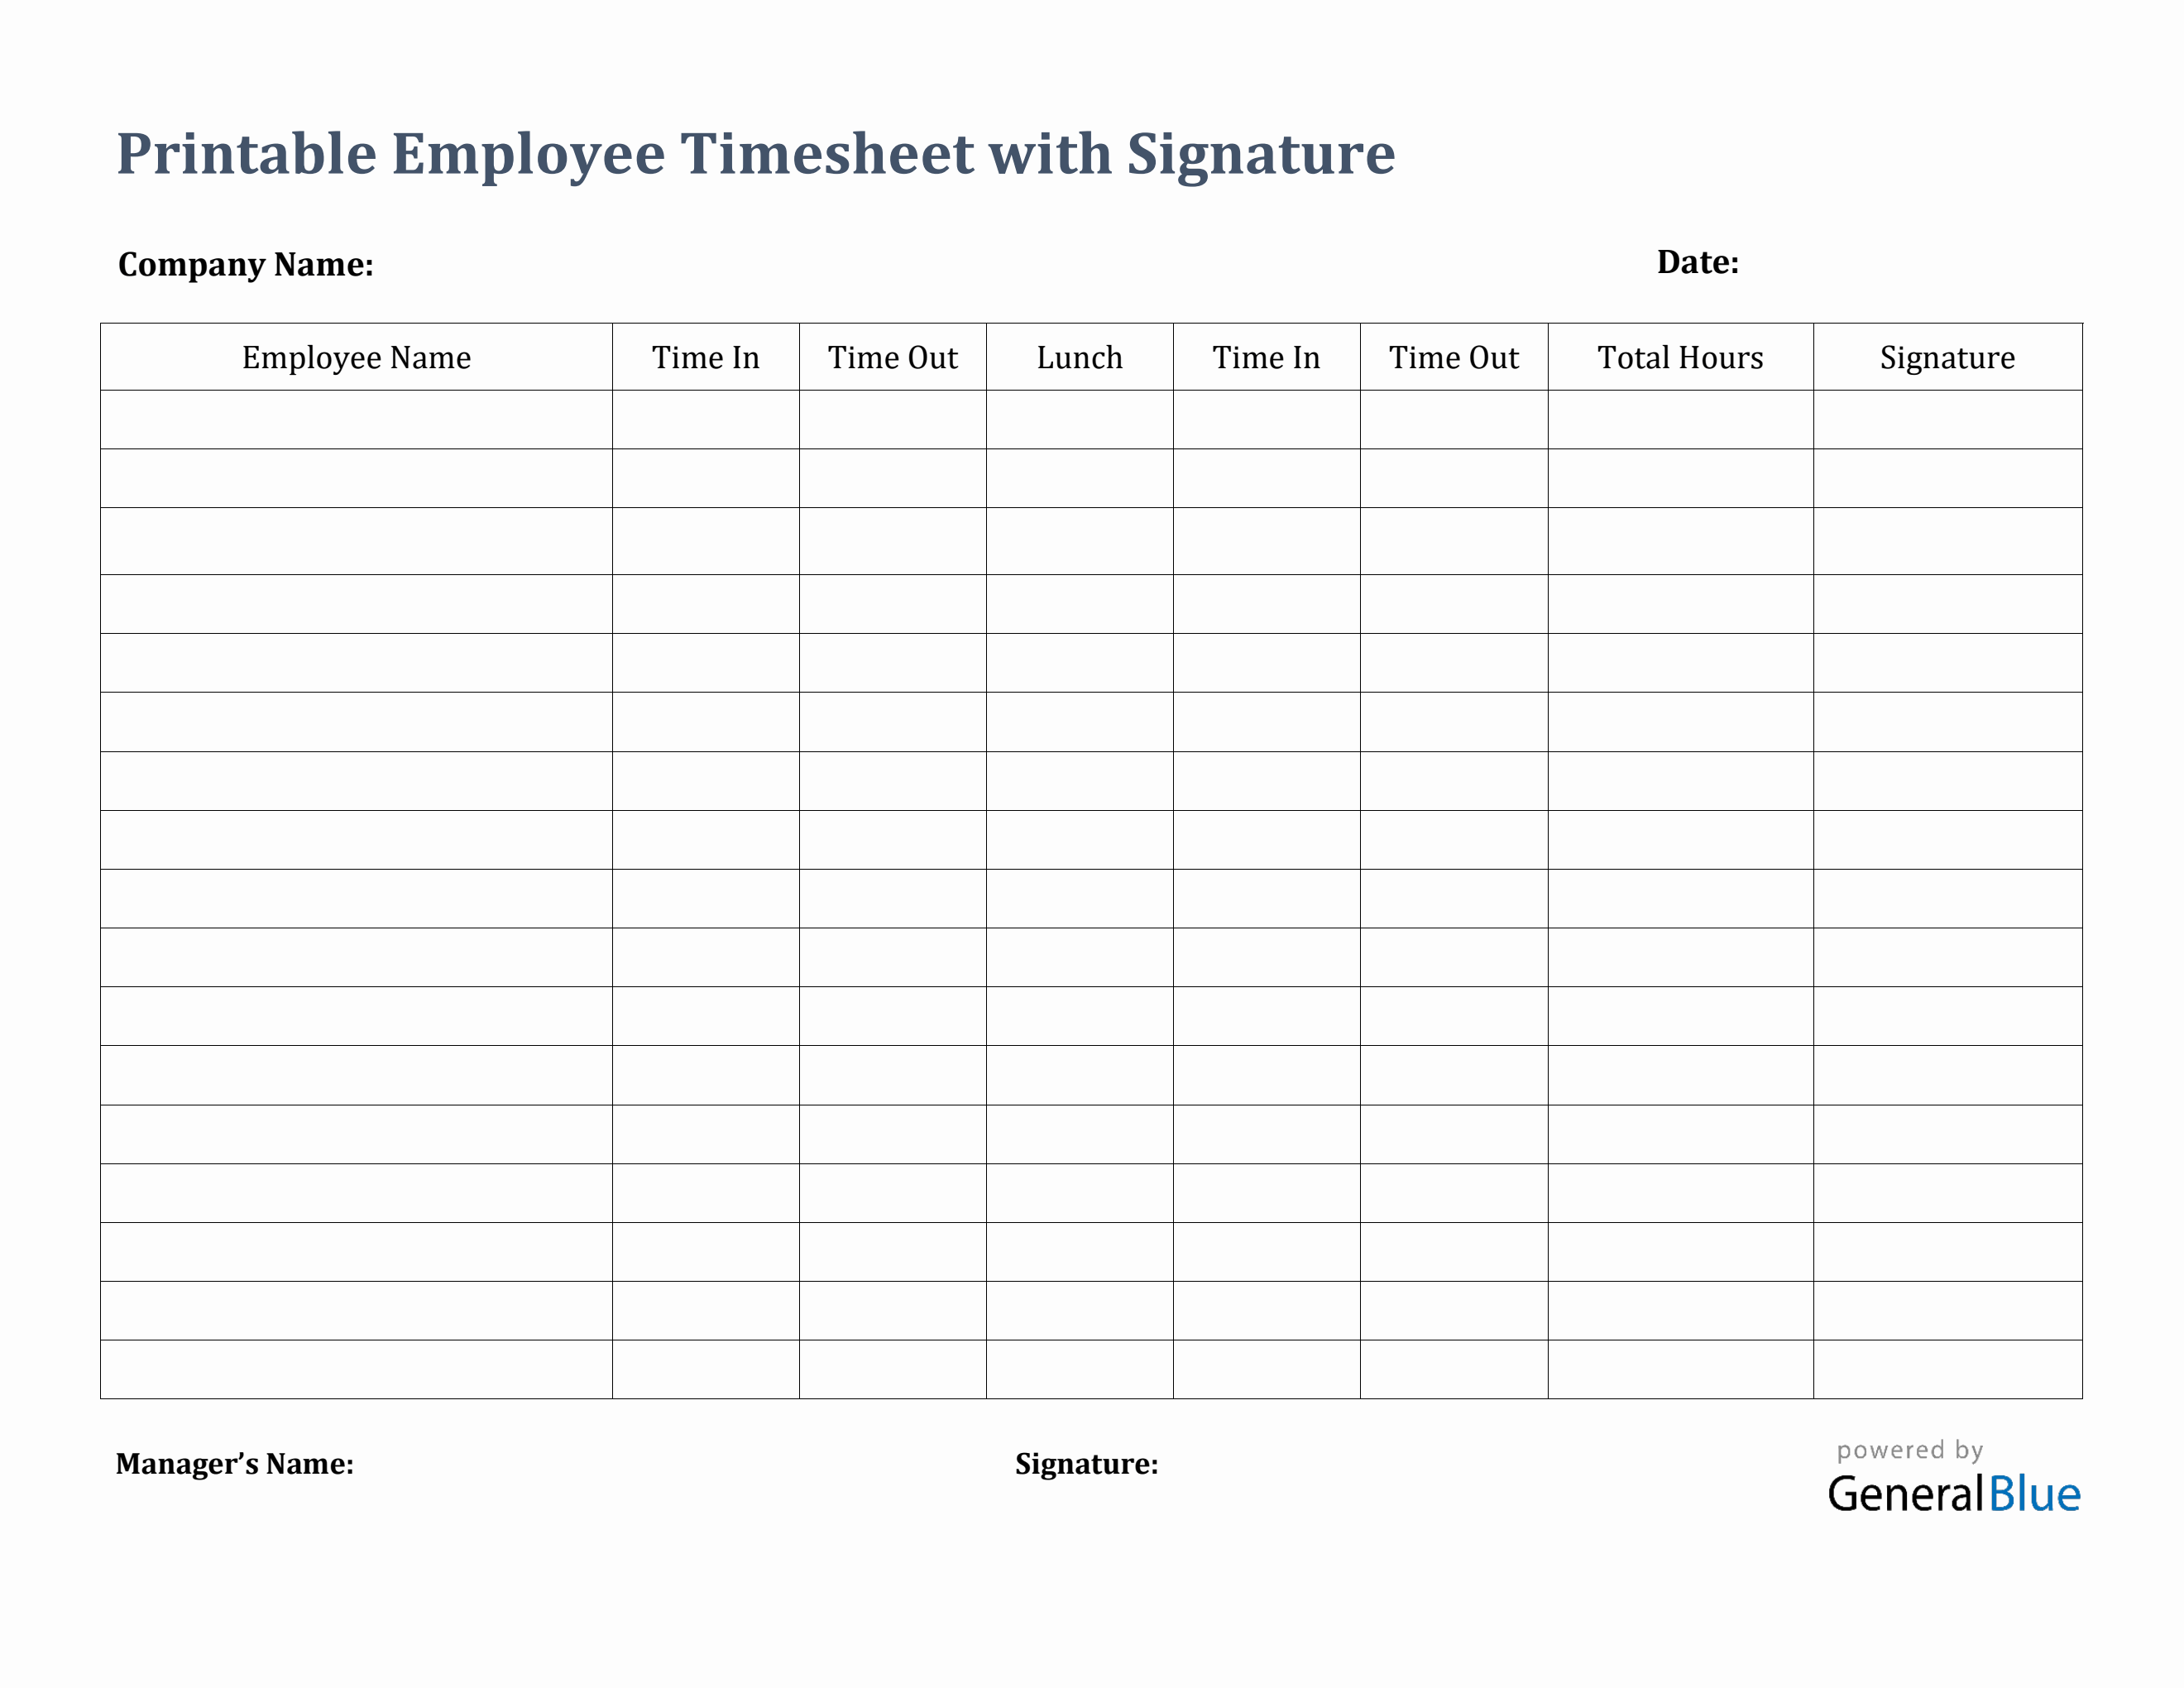 printable-employee-timesheet-with-signature-in-pdf